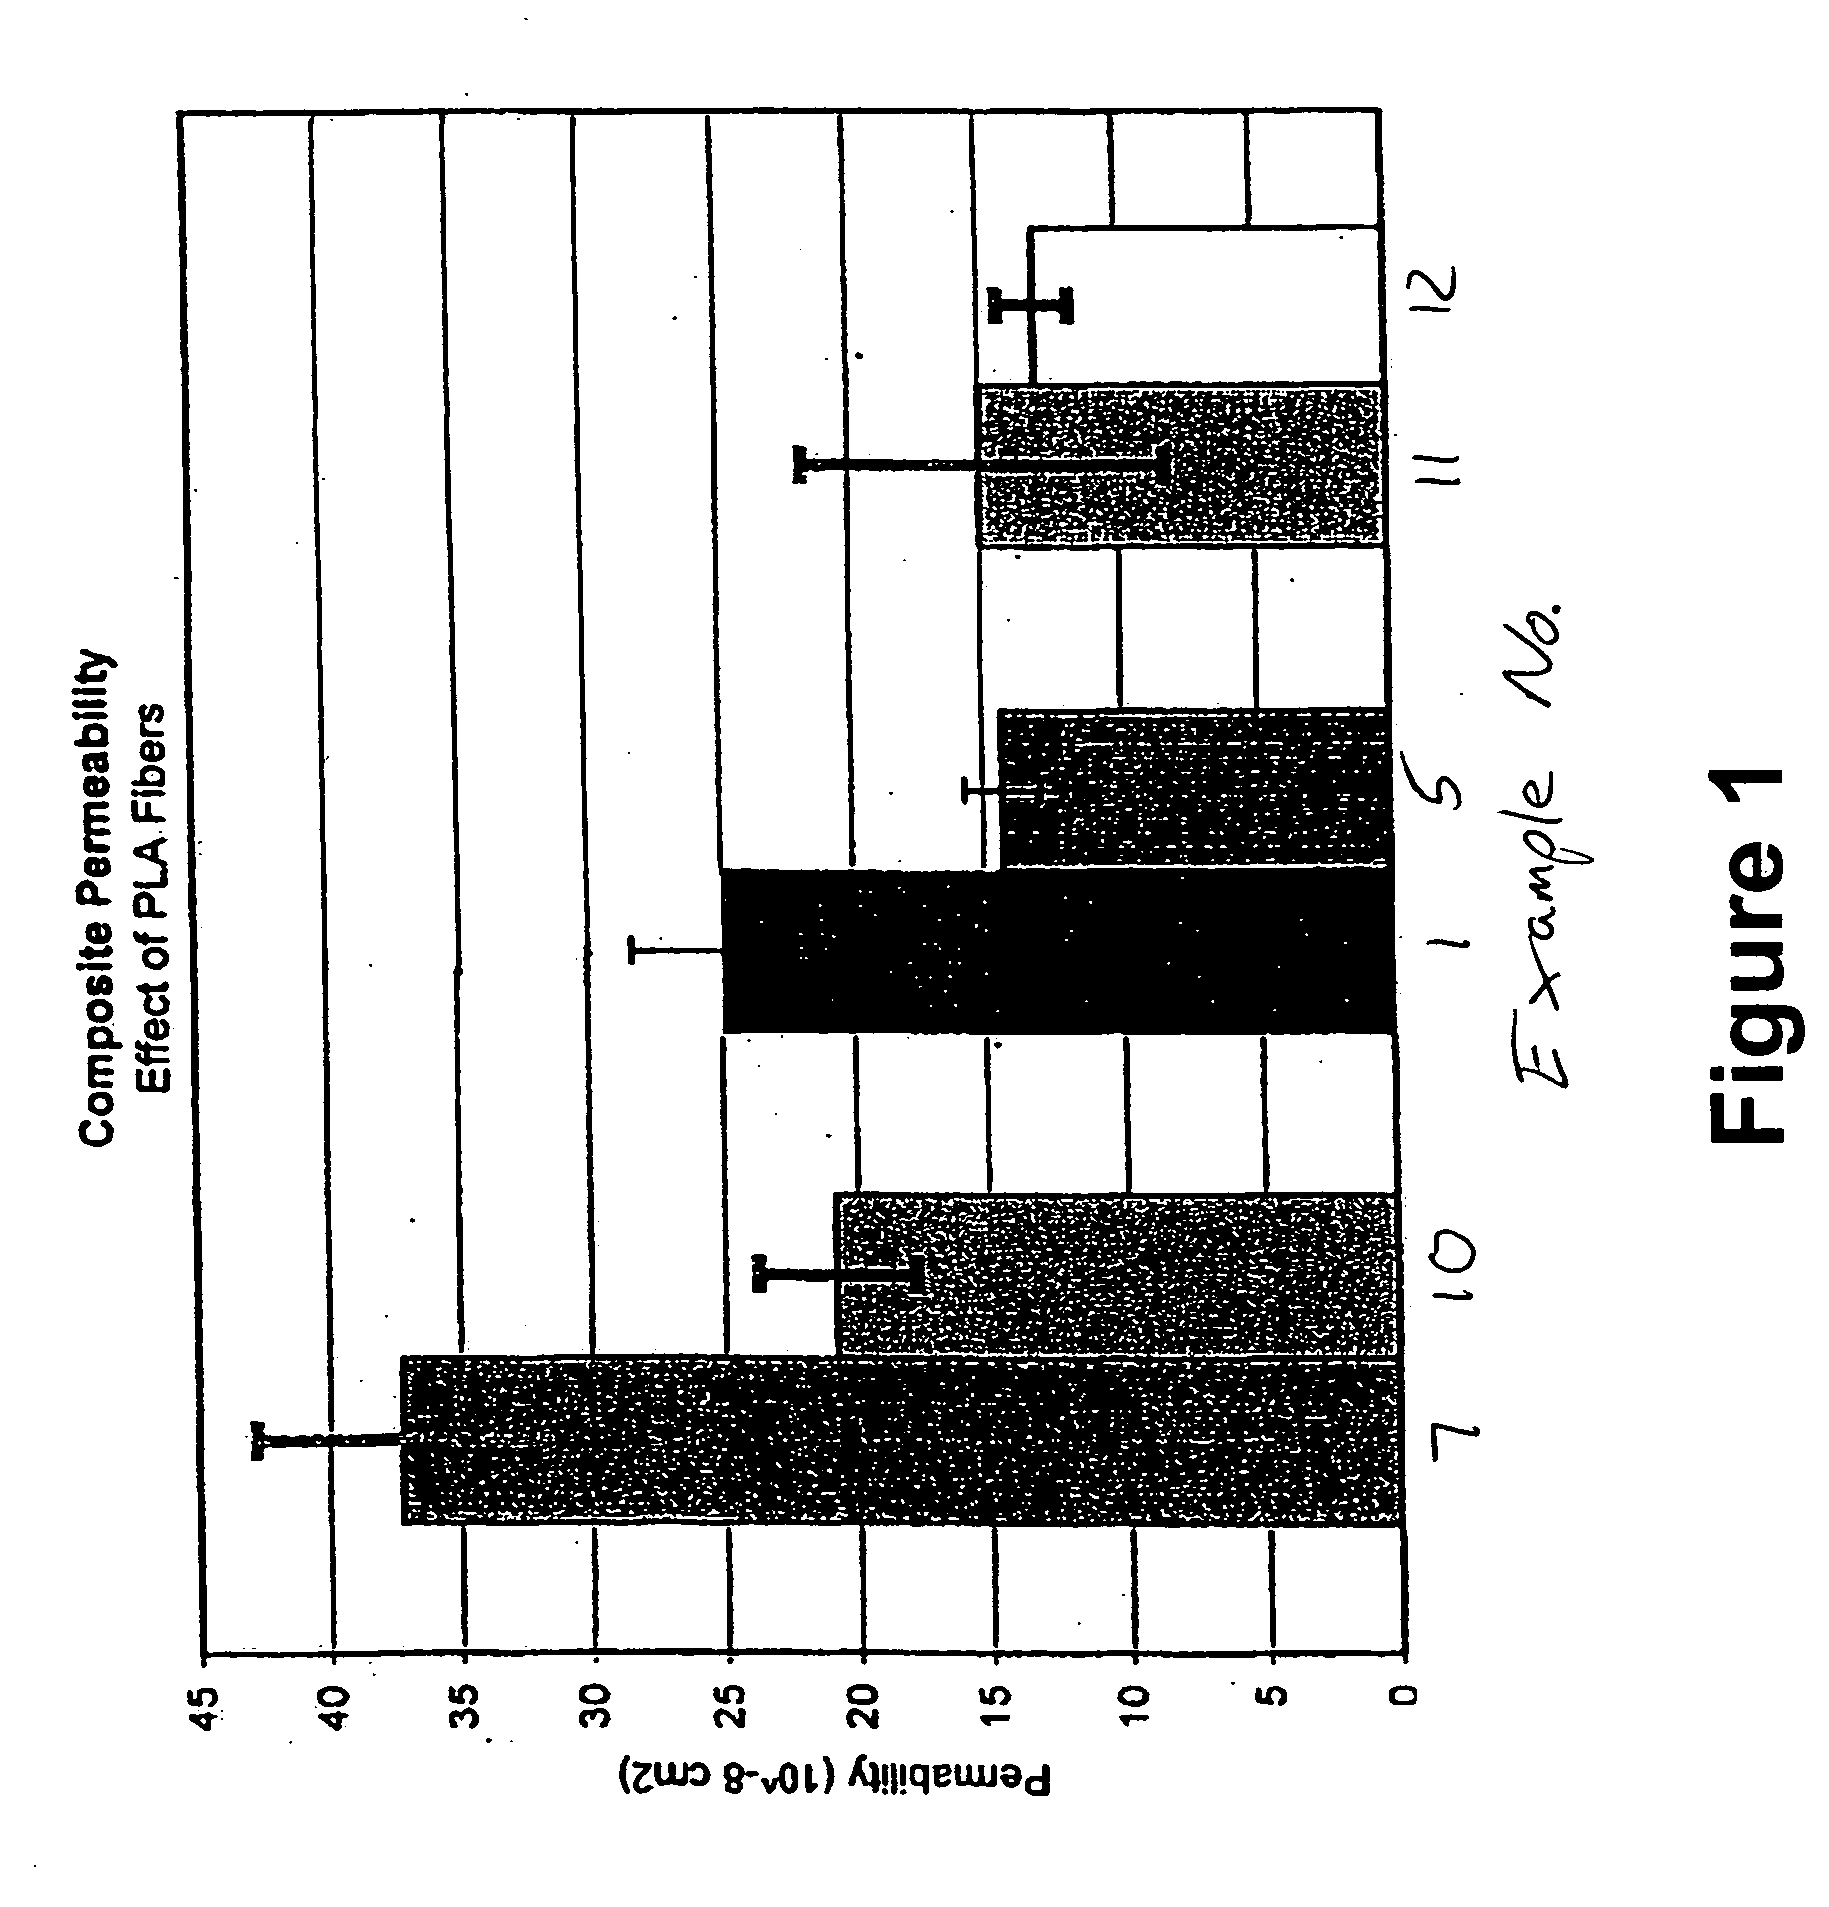 Absorbent composites containing biodegradable reinforcing fibers